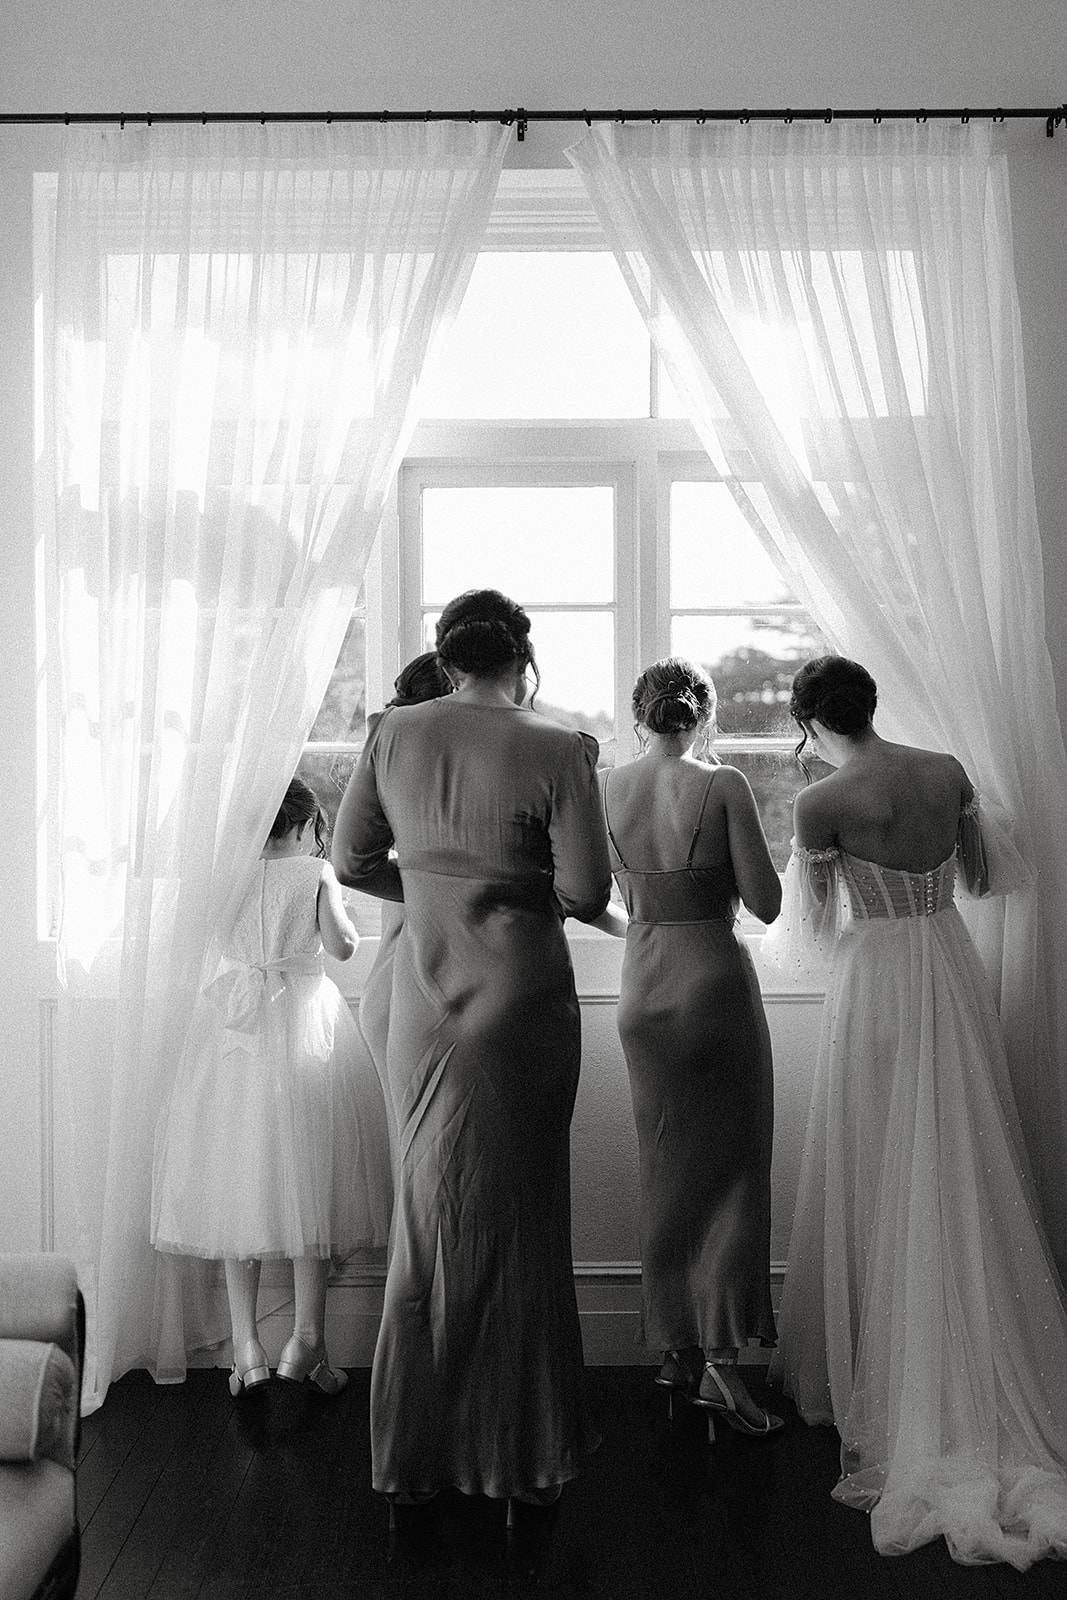 A black and white image shot from behind a few bridesmaids looking out a window for the brides southern highlands wedding at the Robertson Hotel.